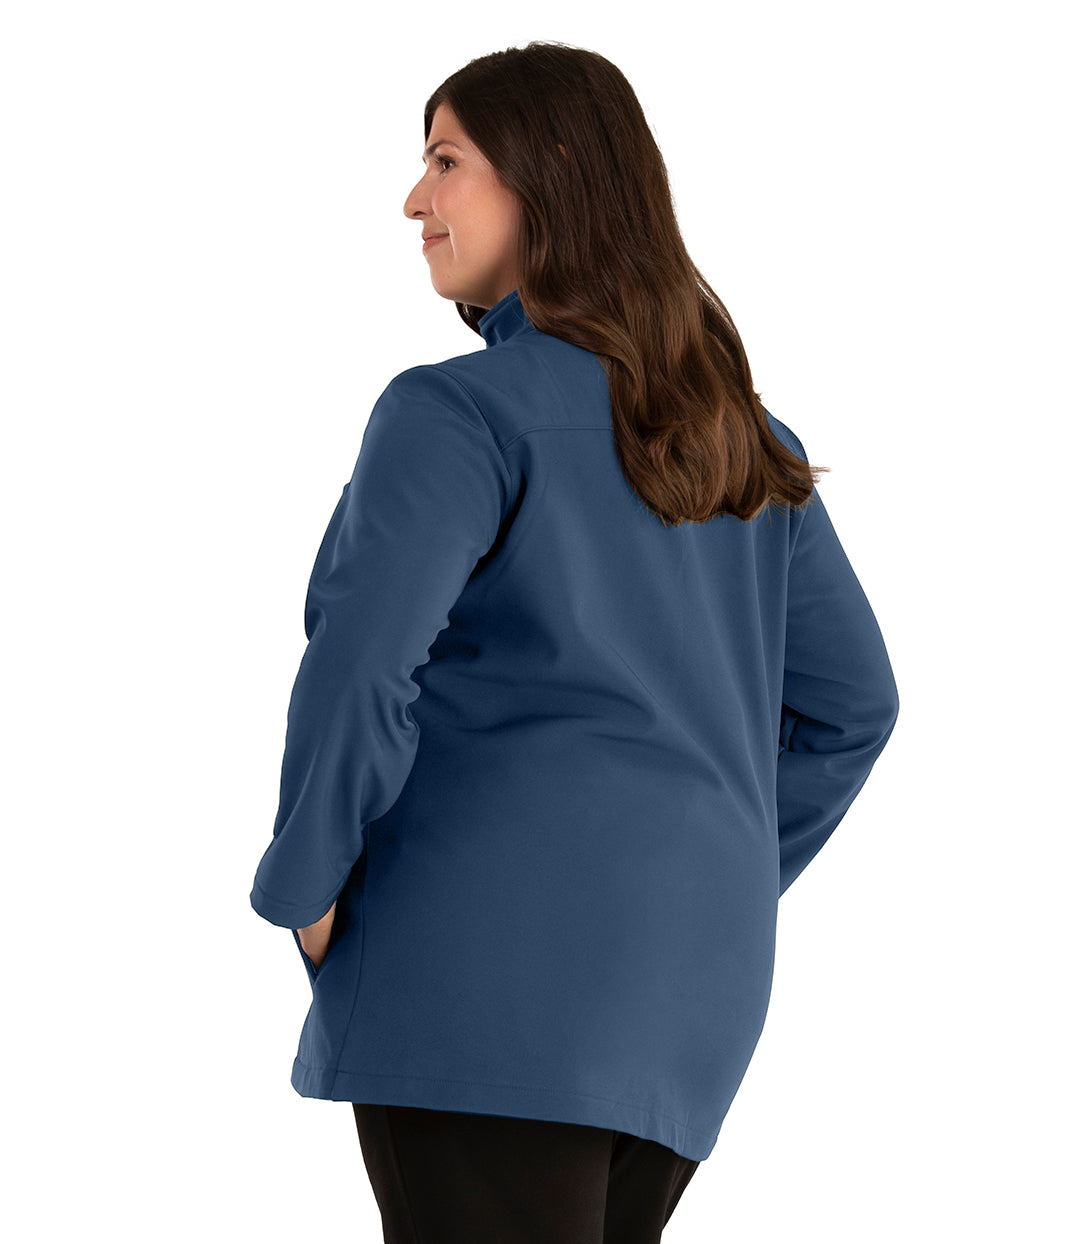 Plus size woman, back side view facing left, wearing a JunoActive plus size Mock Neck Softshell Jacket in Tiempo Teal. The jacket has a mock neck collar, zip front closure, and side pockets. The length of the plus size jacket hits just below the hips.